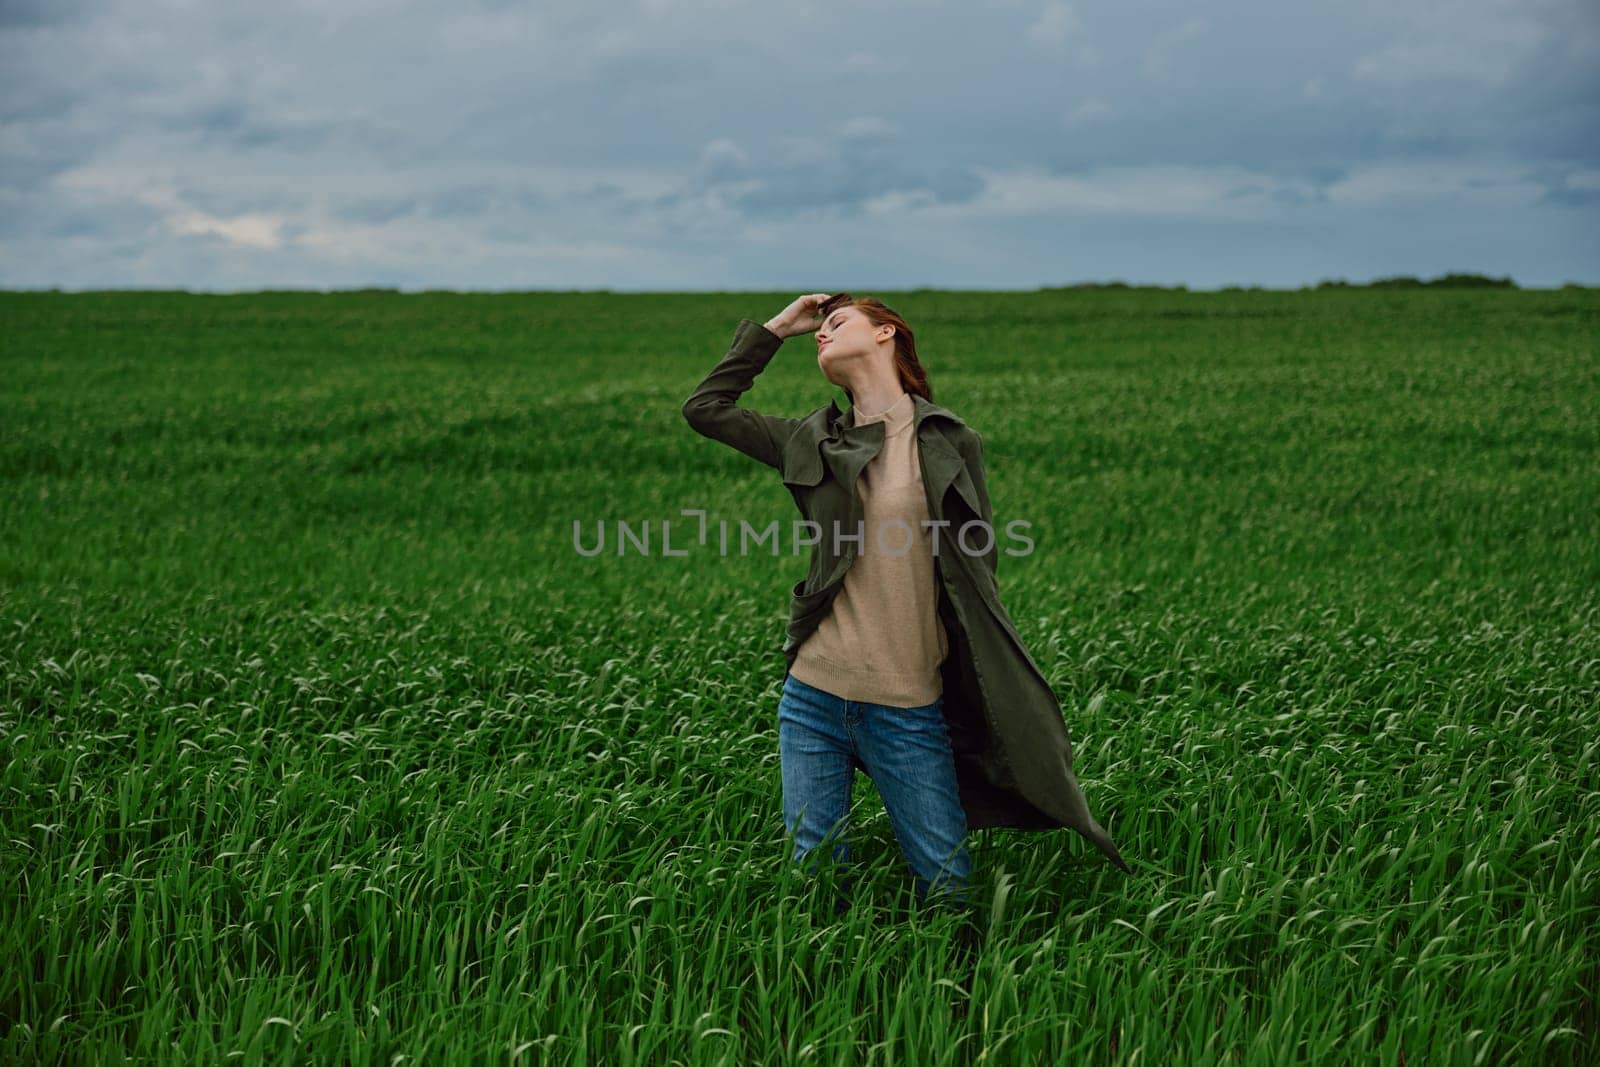 a woman in a dark coat stands in a green field against a cloudy sky holding her hair in the wind by Vichizh